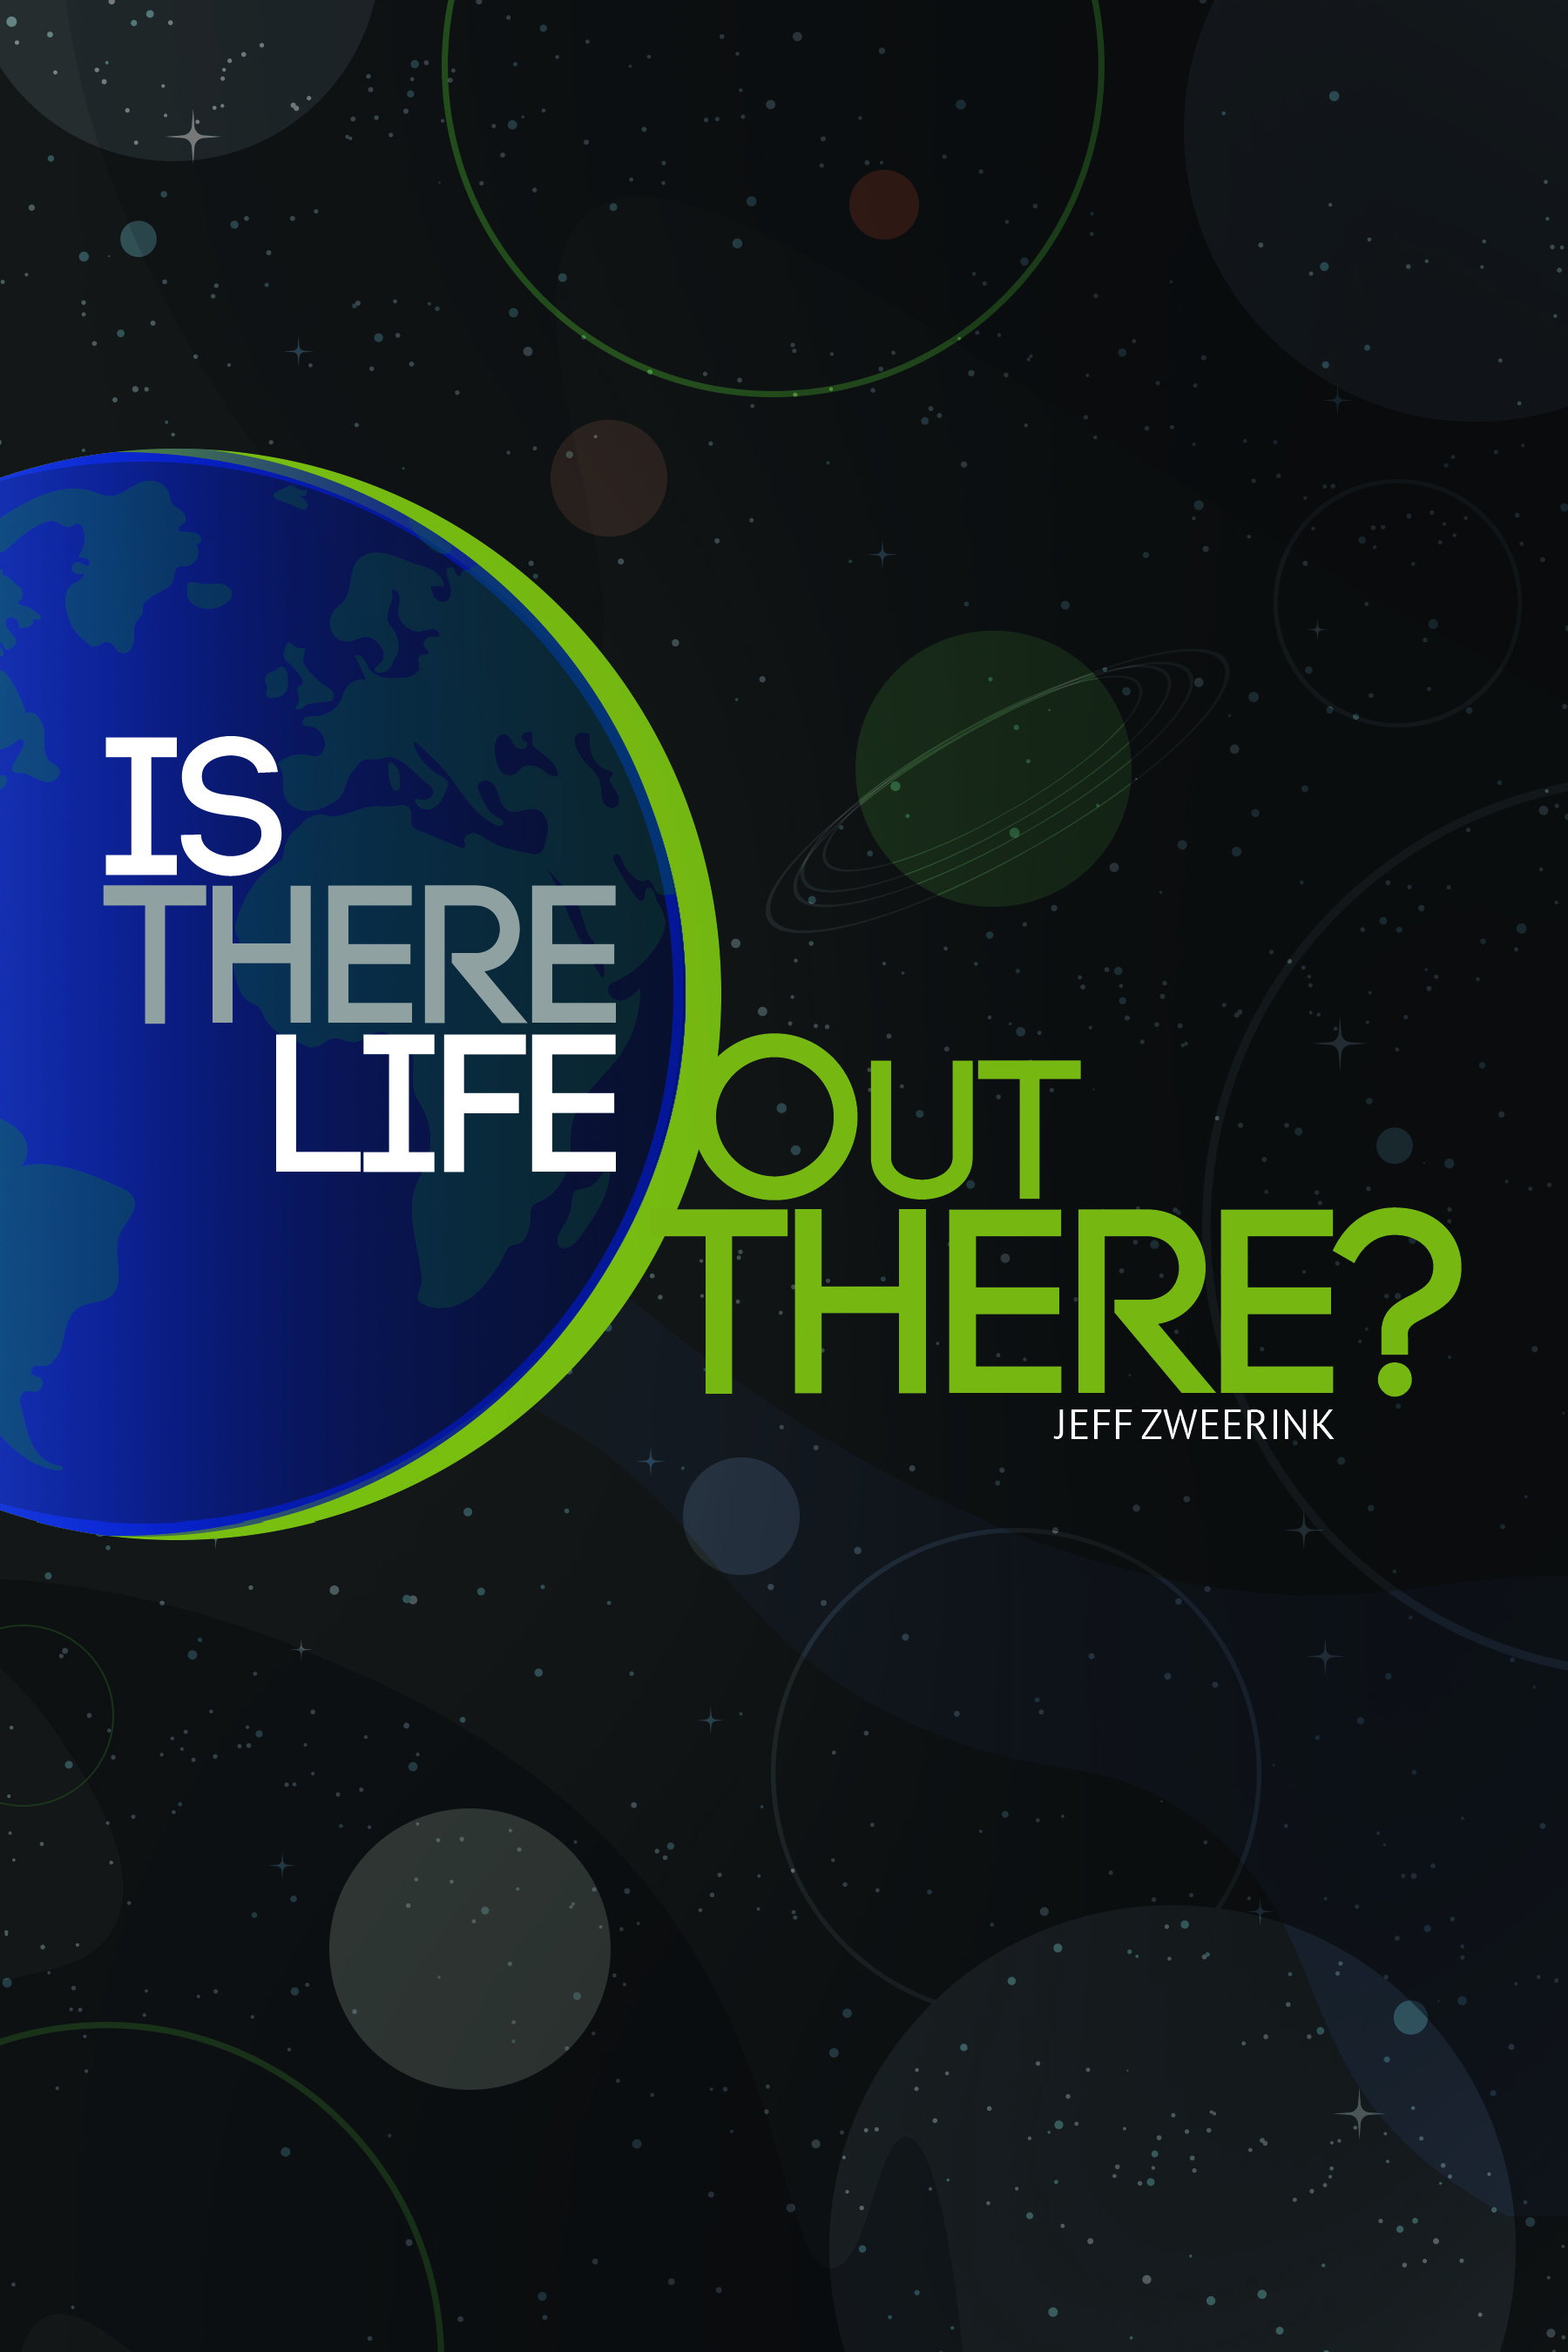 Is There Life Out There? Image